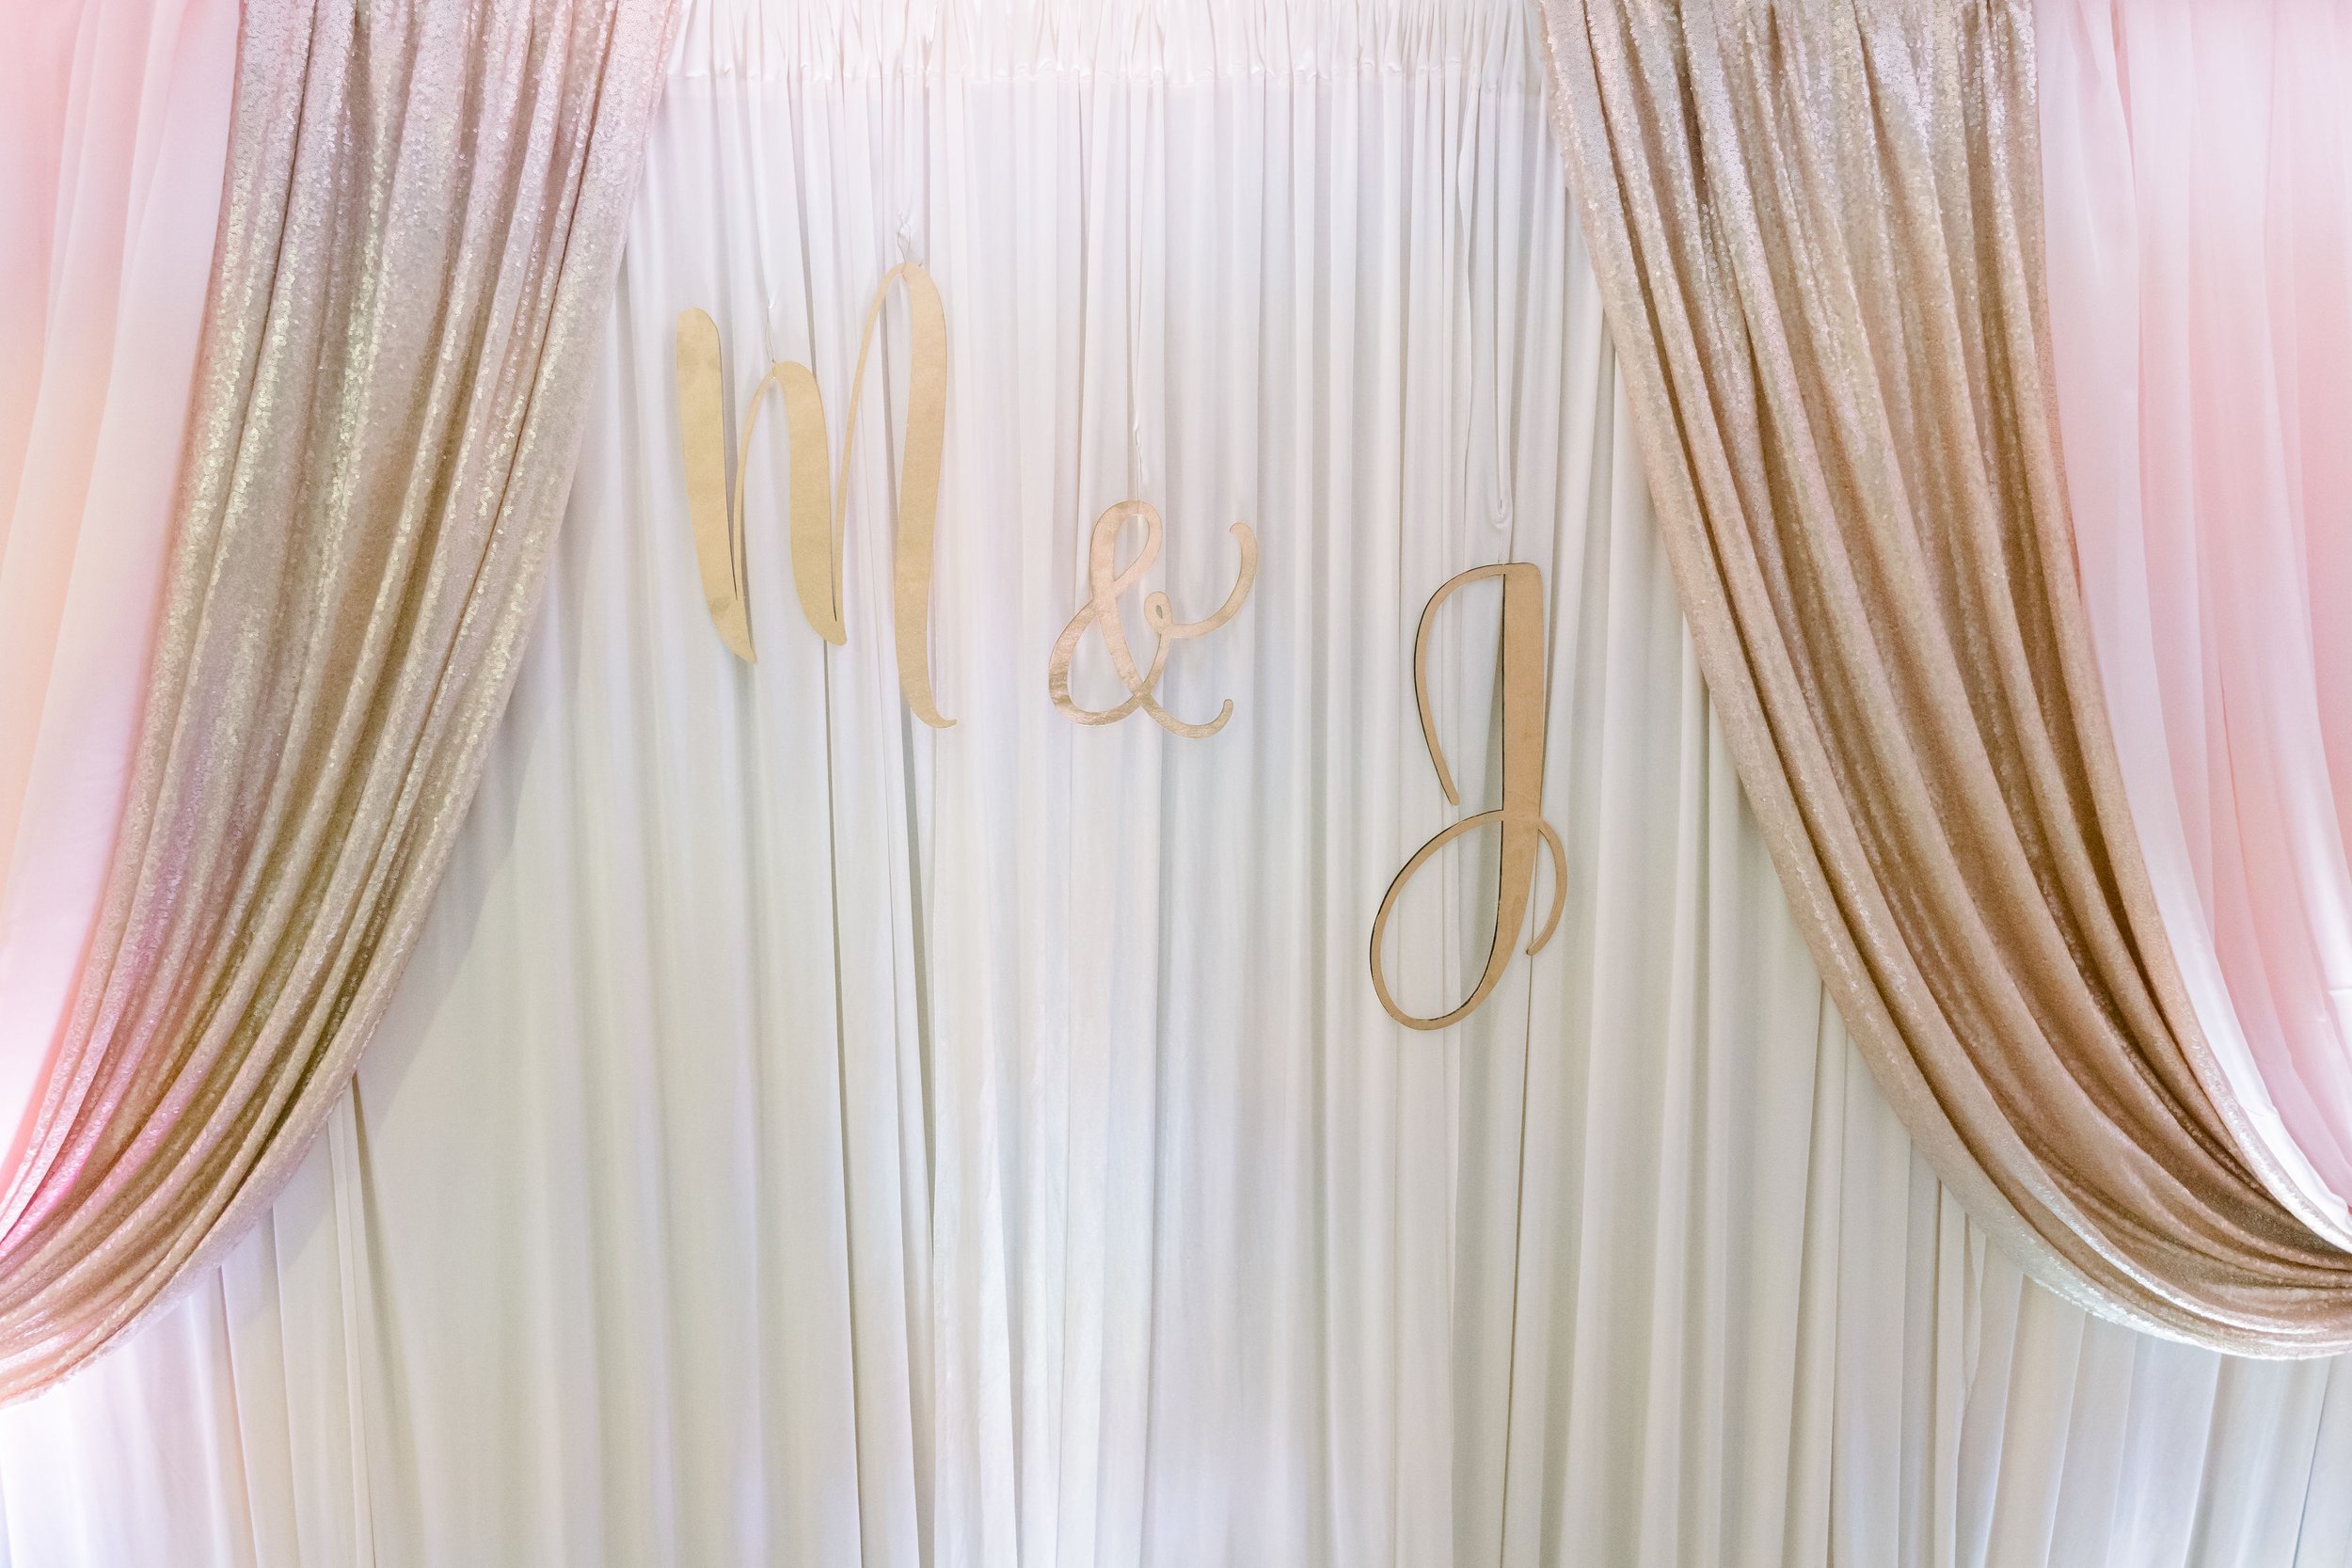 Basement wall draping wedding in the living room garage wall draping intimate wedding at home micro wedding event in chicago chiavari chairs table ren (4).jpg